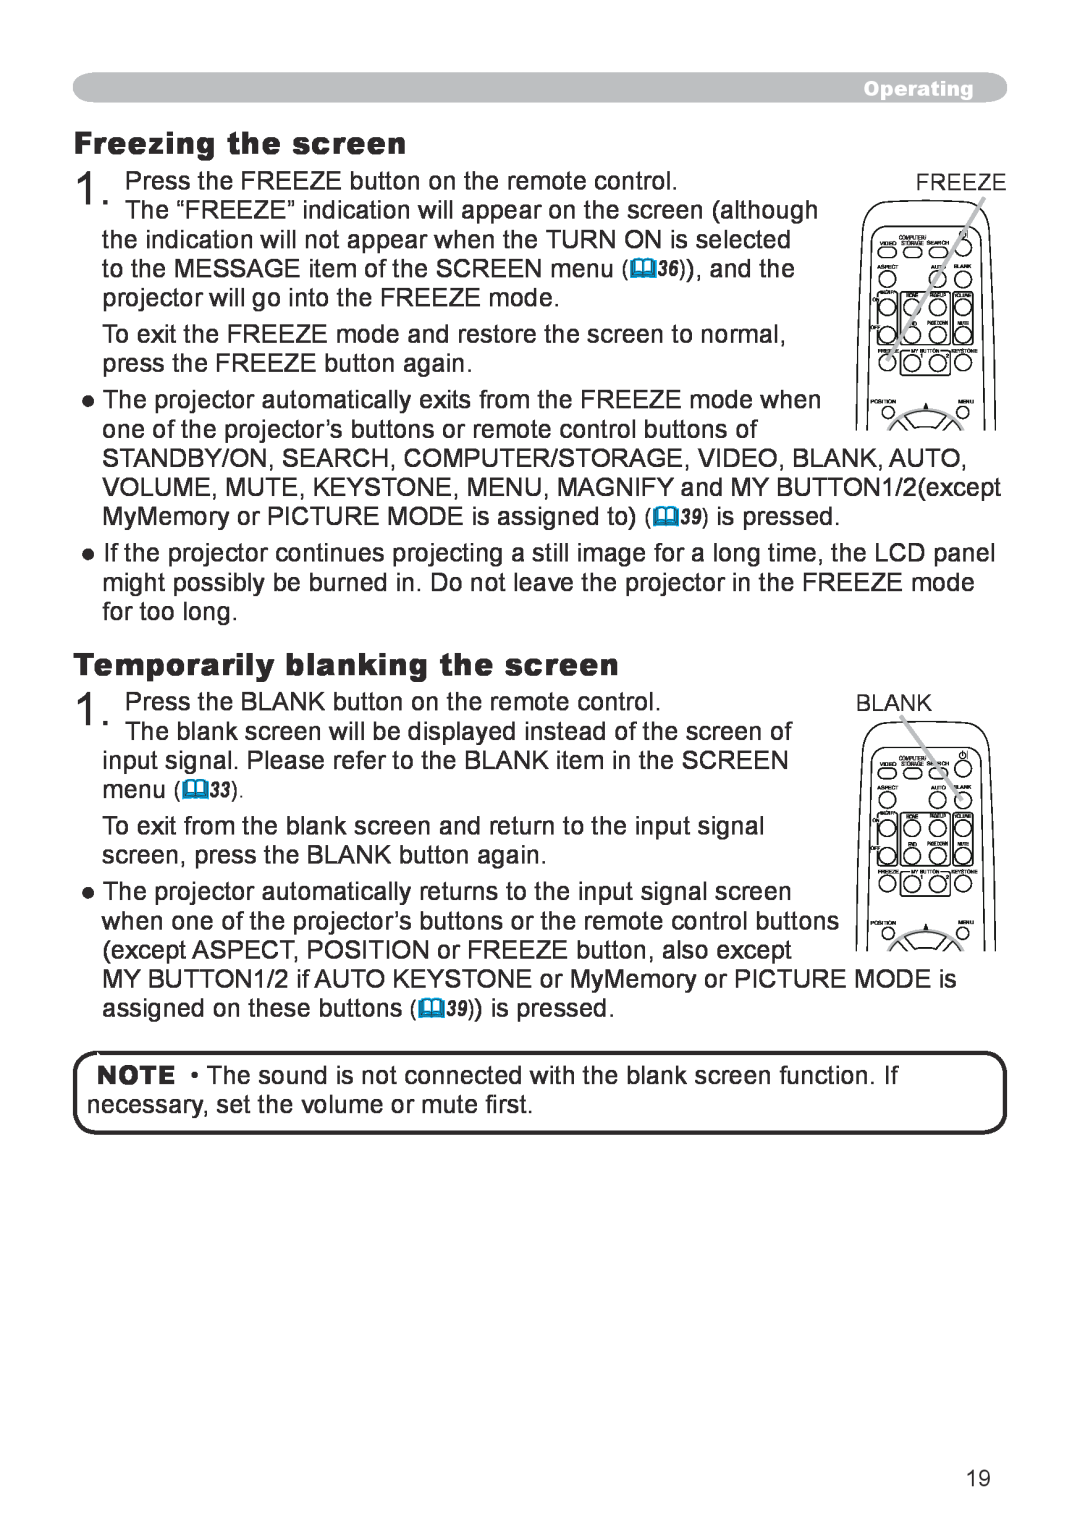 Apple CPX1, CPX5 user manual Freezing the screen, Temporarily blanking the screen 